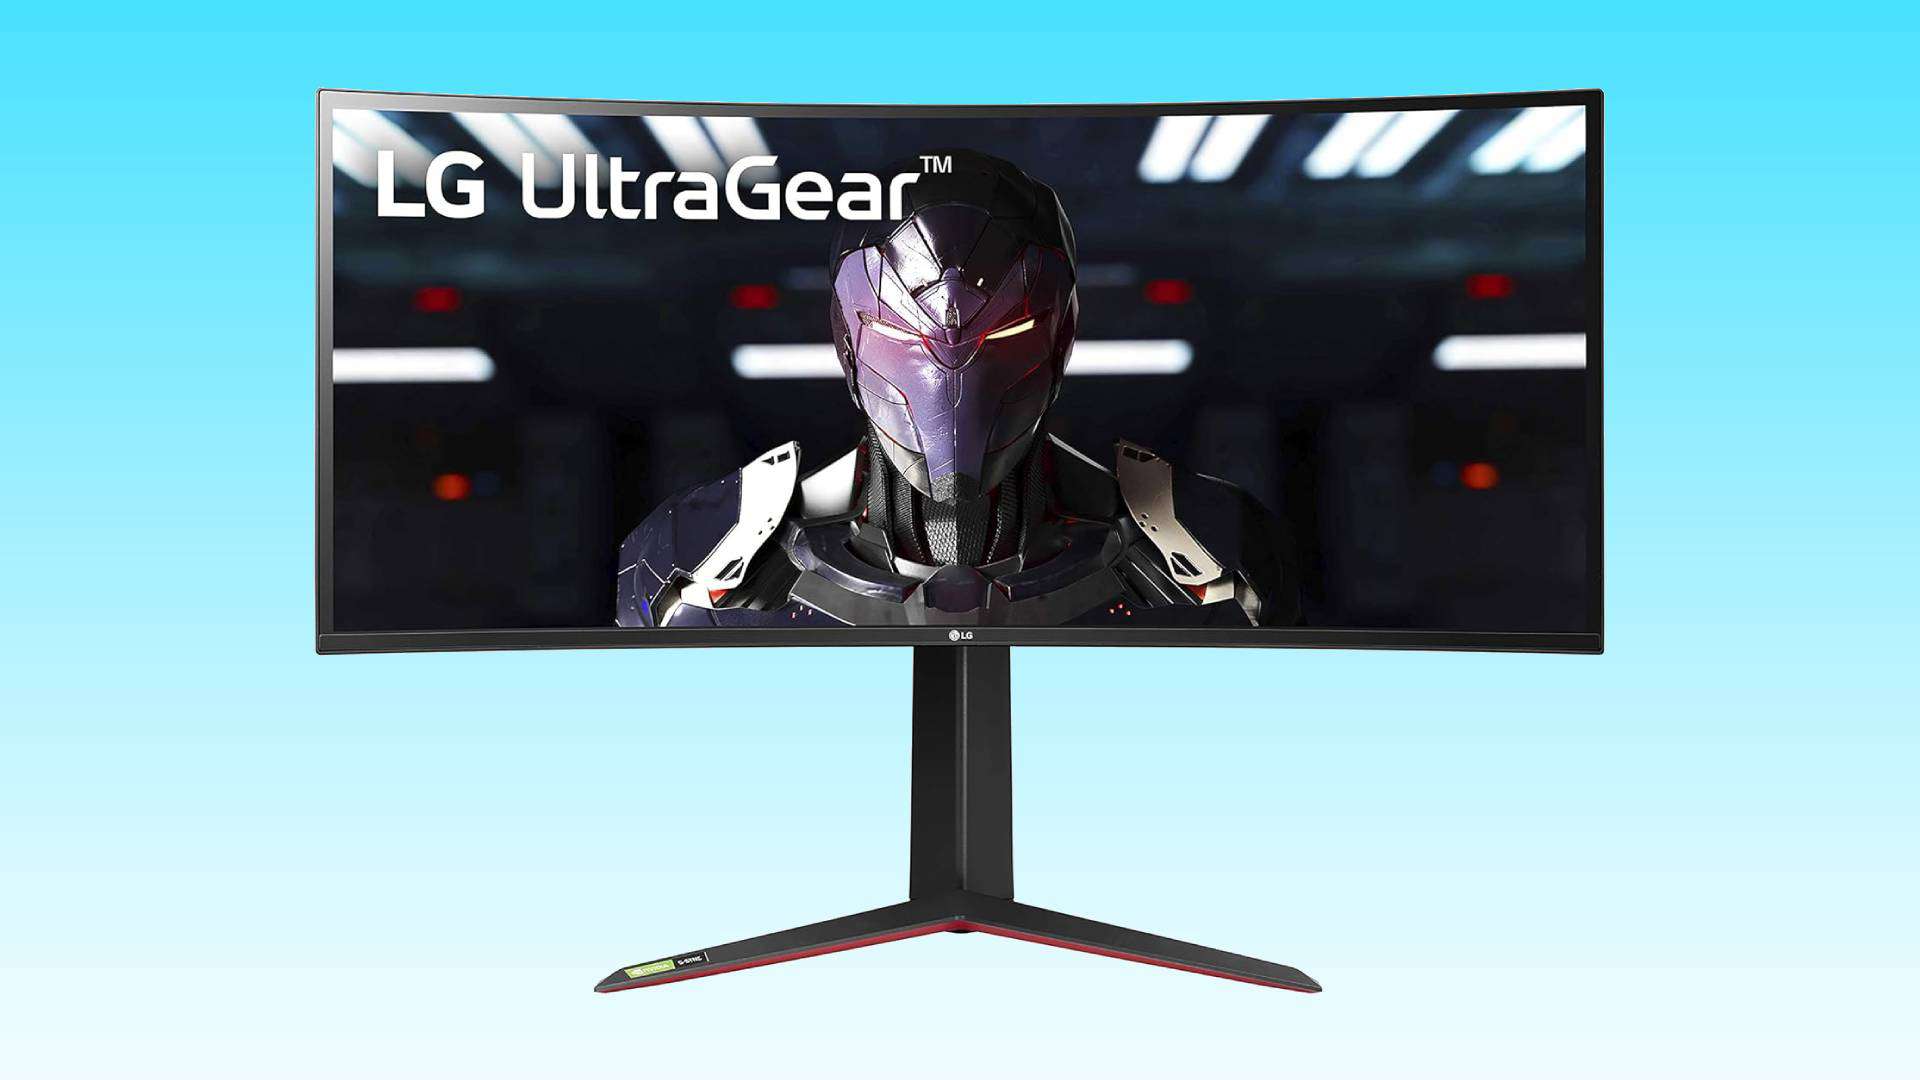 LG curved ultrawide gaming monitor displaying a futuristic armored character.